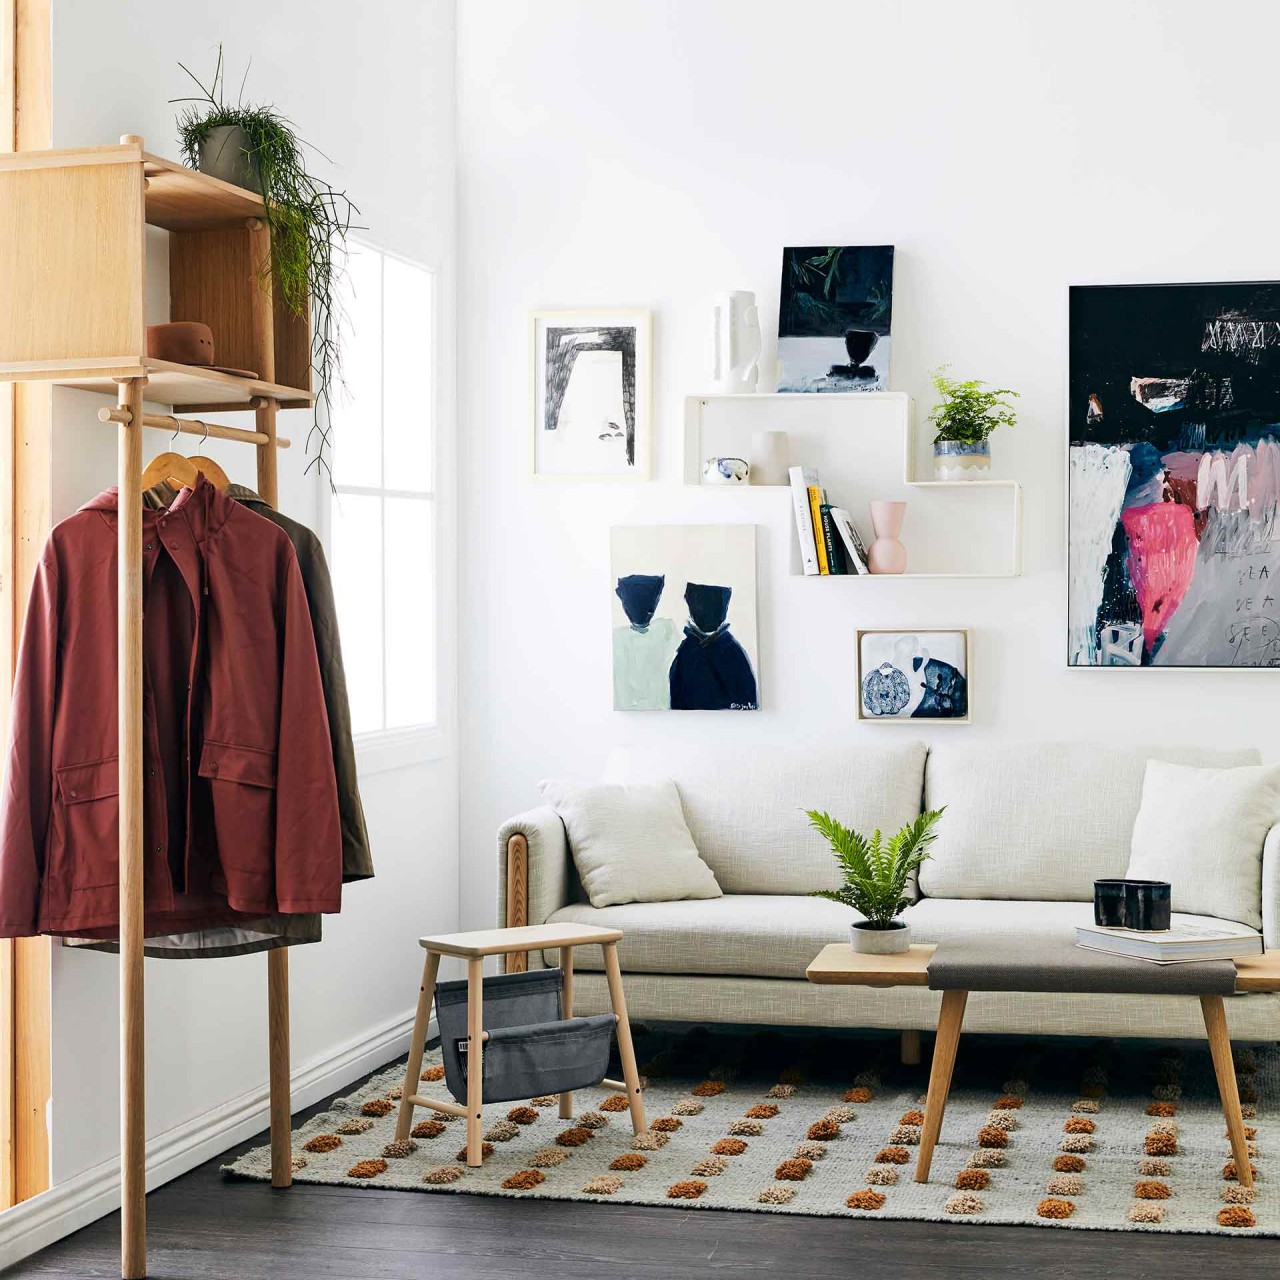 How to make your compact home seem bigger